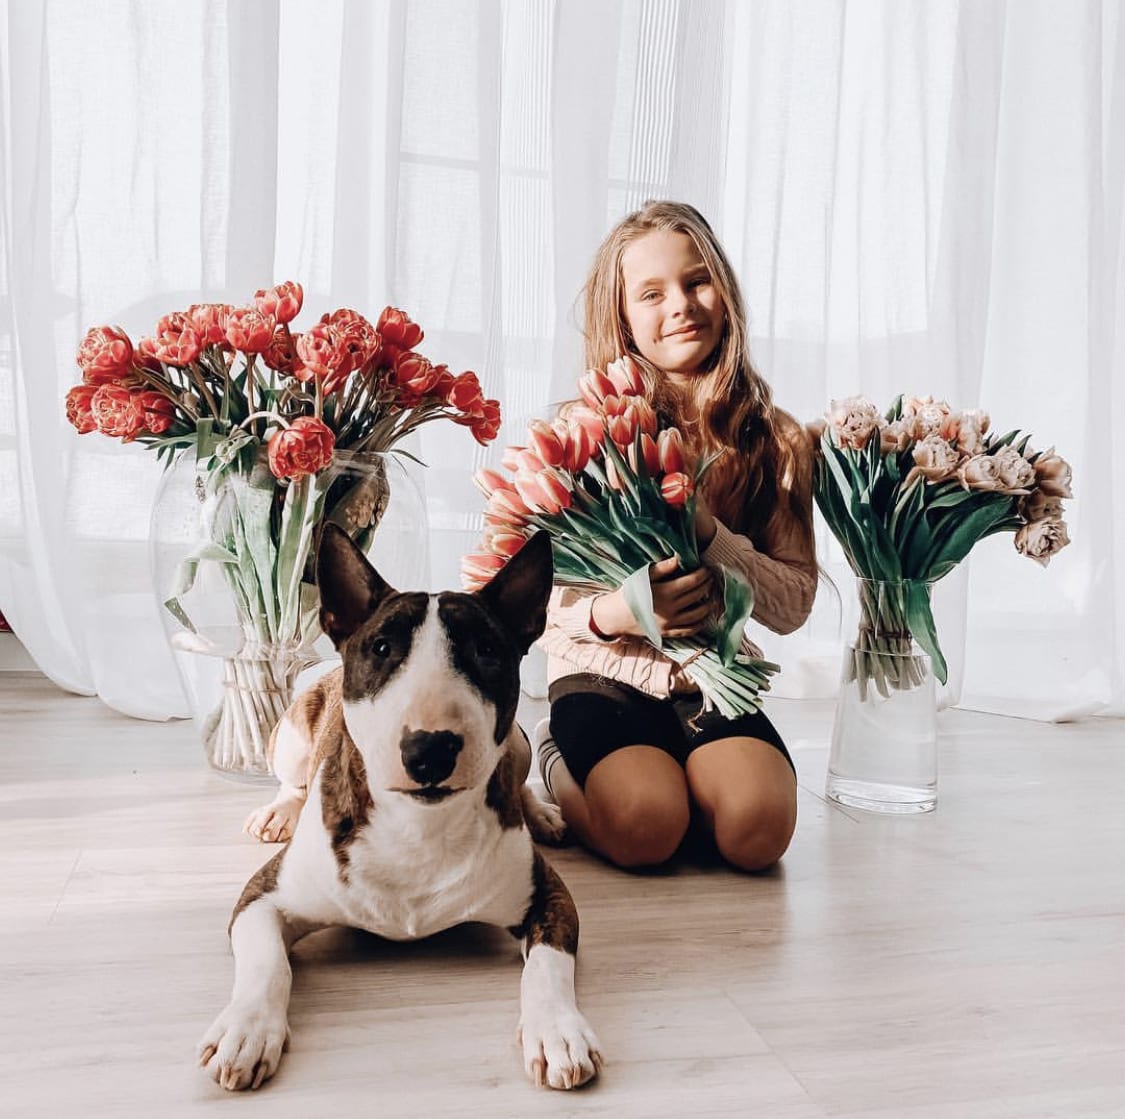 A Bull Terrier lying on the floor with a woman sitting in between the flowers in vases behind while holding a bunch of tulip flowers